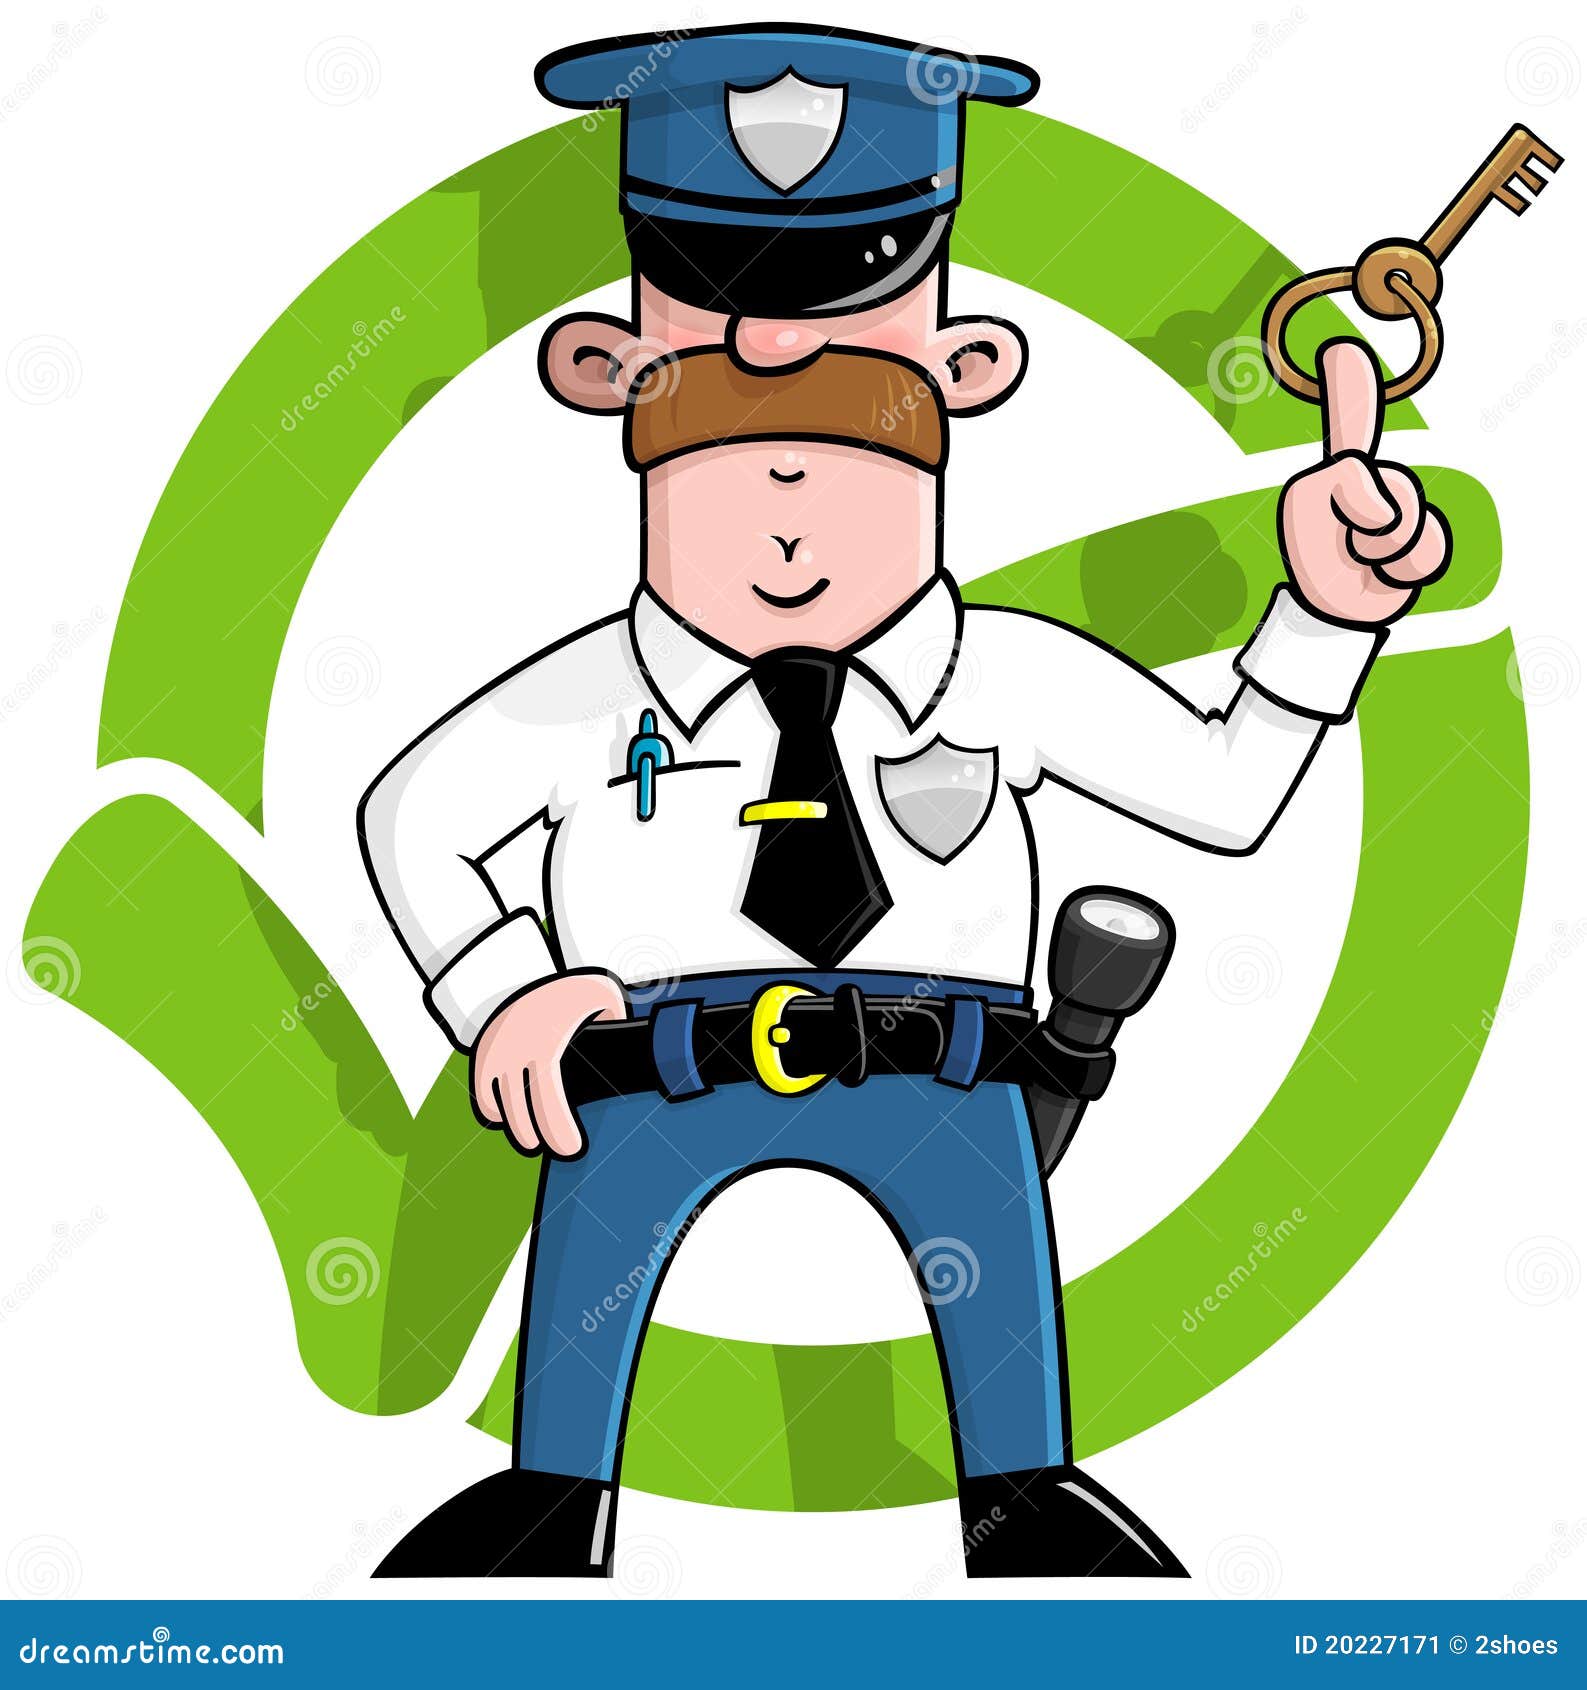 security officer clipart - photo #15